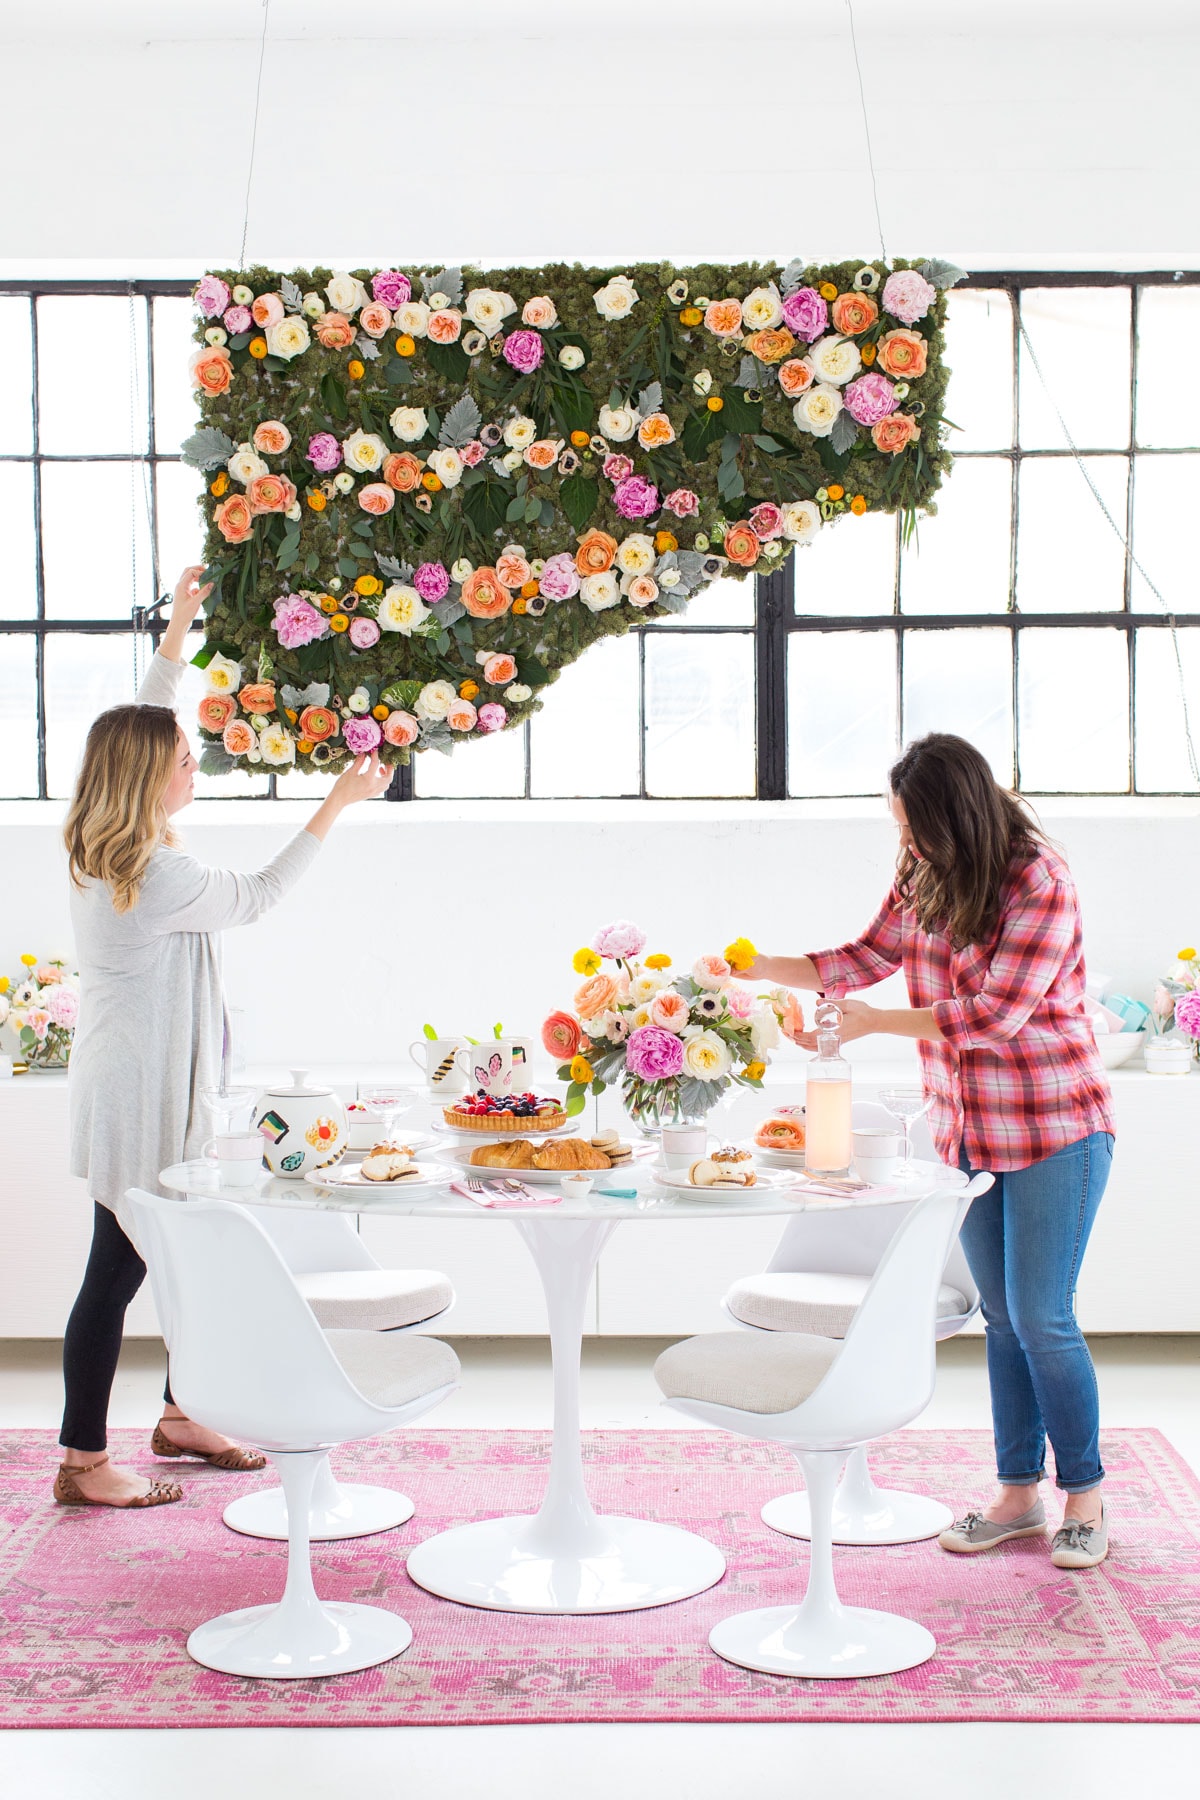 DIY Hanging Flower Wall Installation by Top Houston Lifestyle Blogger Ashley Rose of Sugar & Cloth | #diy #flowerwall #wallhanging #flower #floral #diydecor #backdrop 